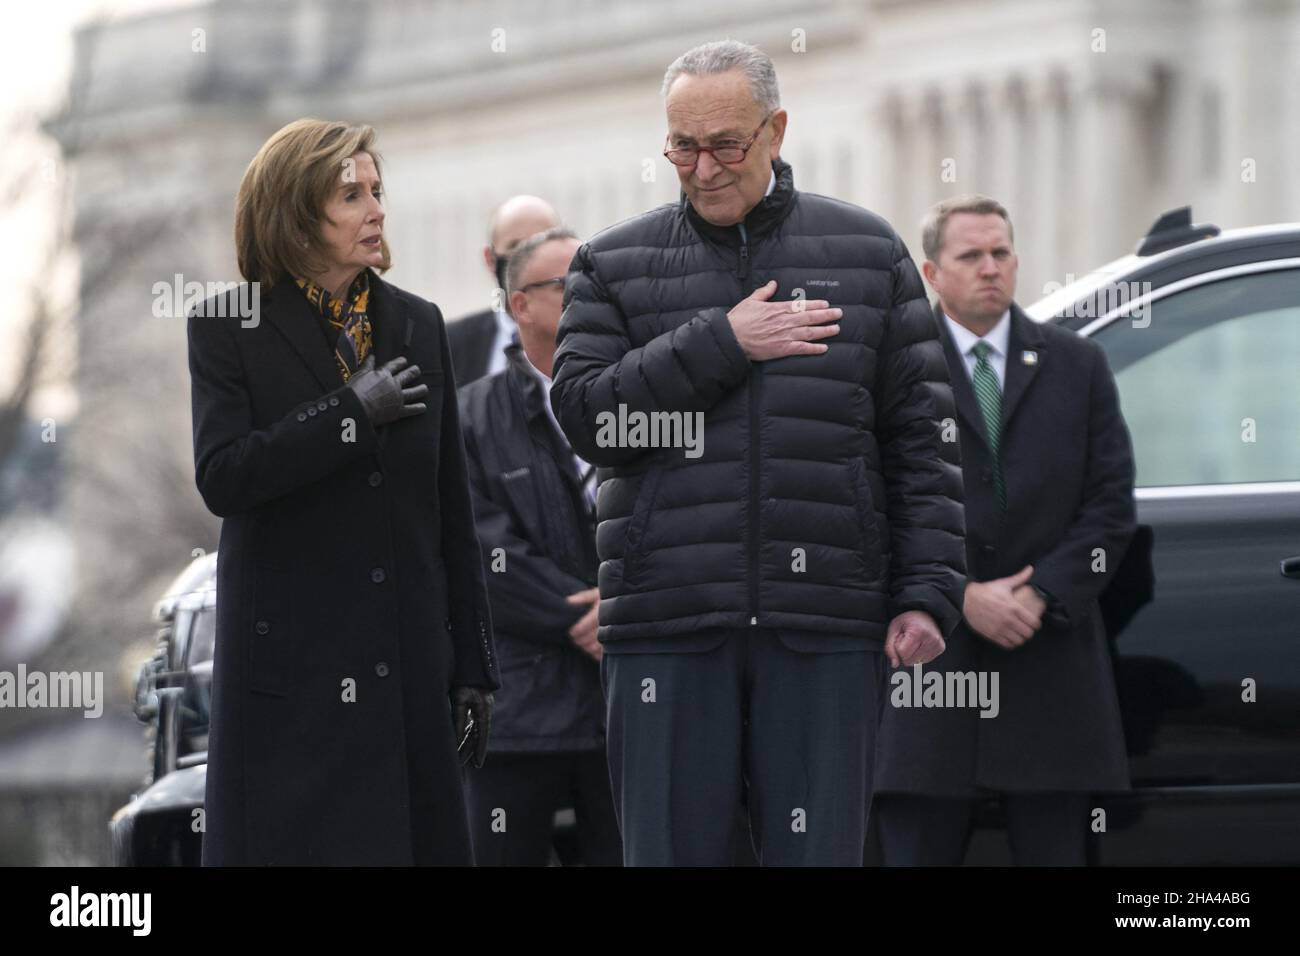 Washington DC, USA. 10th Dec 2021. Speaker Nancy Pelosi (D-Calif.) and House Majority Leader Charles Schumer (D-N.Y.) watch a military honor guard carries the casket of Sen. Bob Dole (R-Kan.) after lying in state at the U.S. Capitol in Washington, DC, on Friday, December 10, 2021. Dole will be taken to Washington National Cathedral for a funeral service. Photo by Greg Nash/Pool/ABACAPRESS.COM Credit: Abaca Press/Alamy Live News Stock Photo